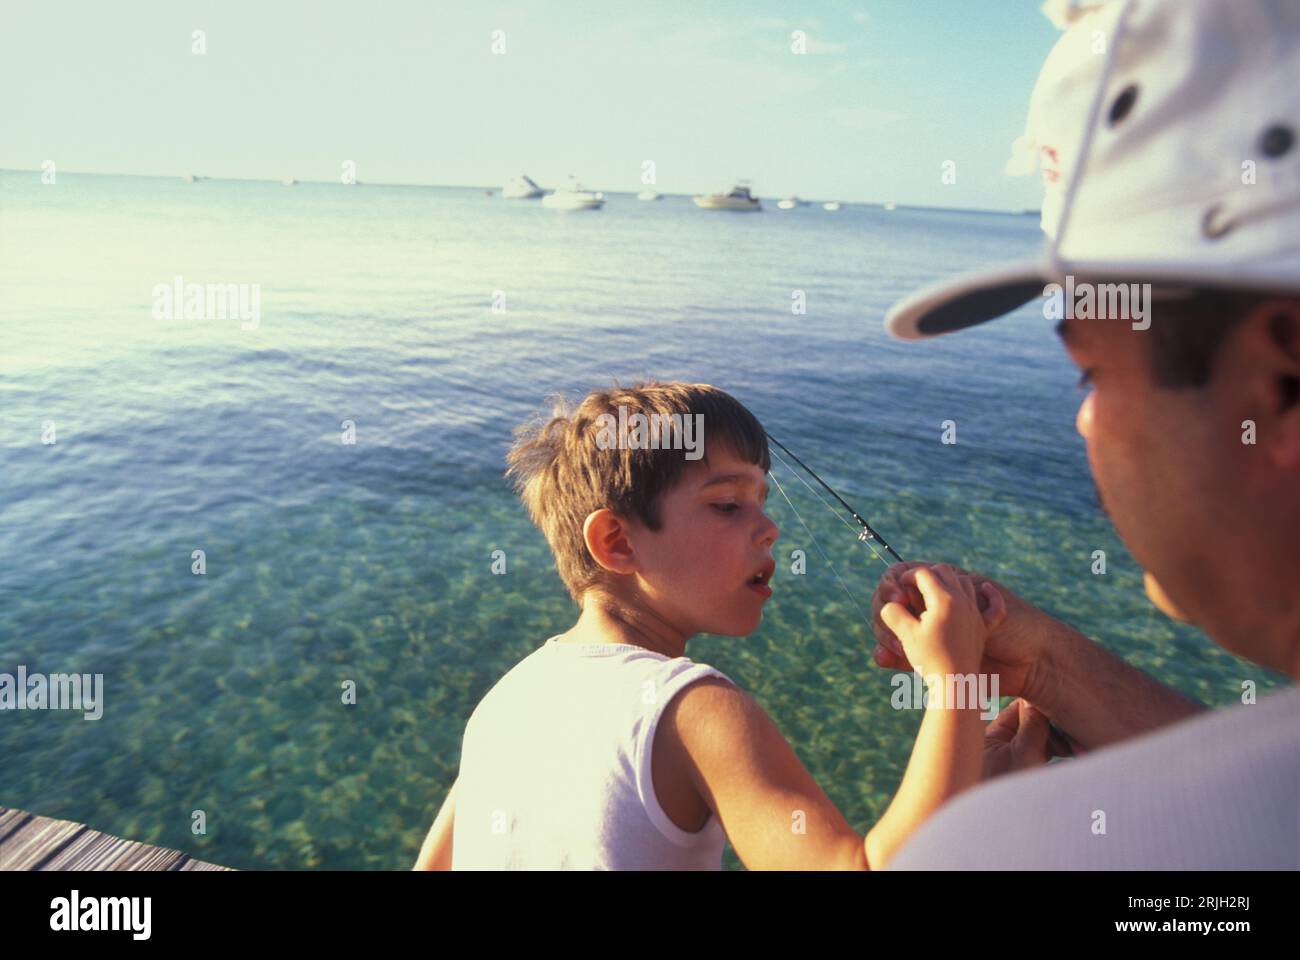 Father teaching son how to put the bait in the fishing hook, Florida Keys, USA Stock Photo